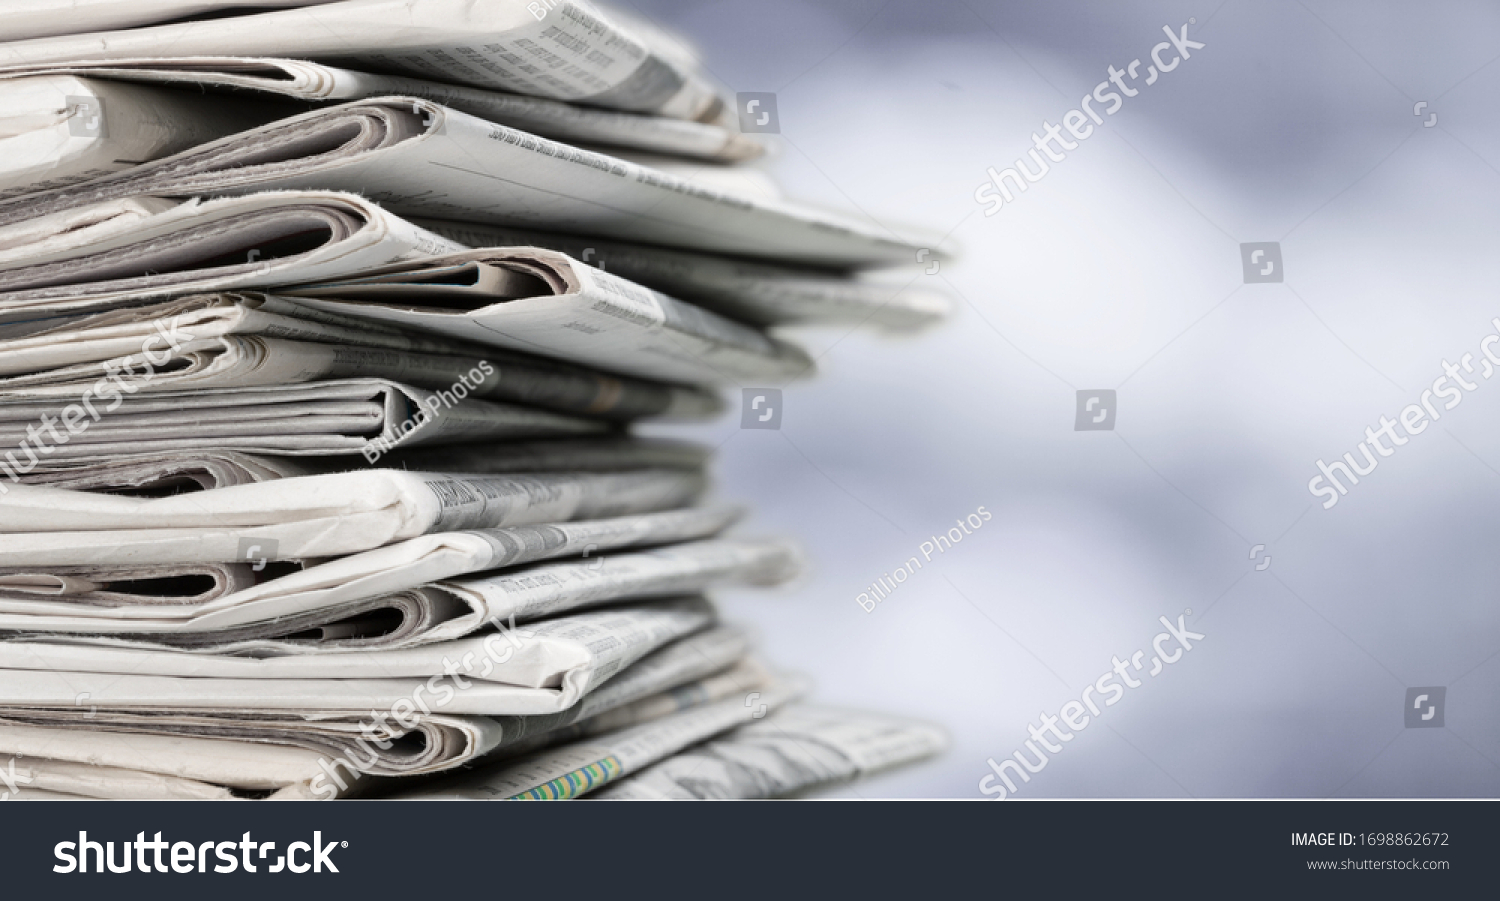 Pile of newspapers on blur background #1698862672